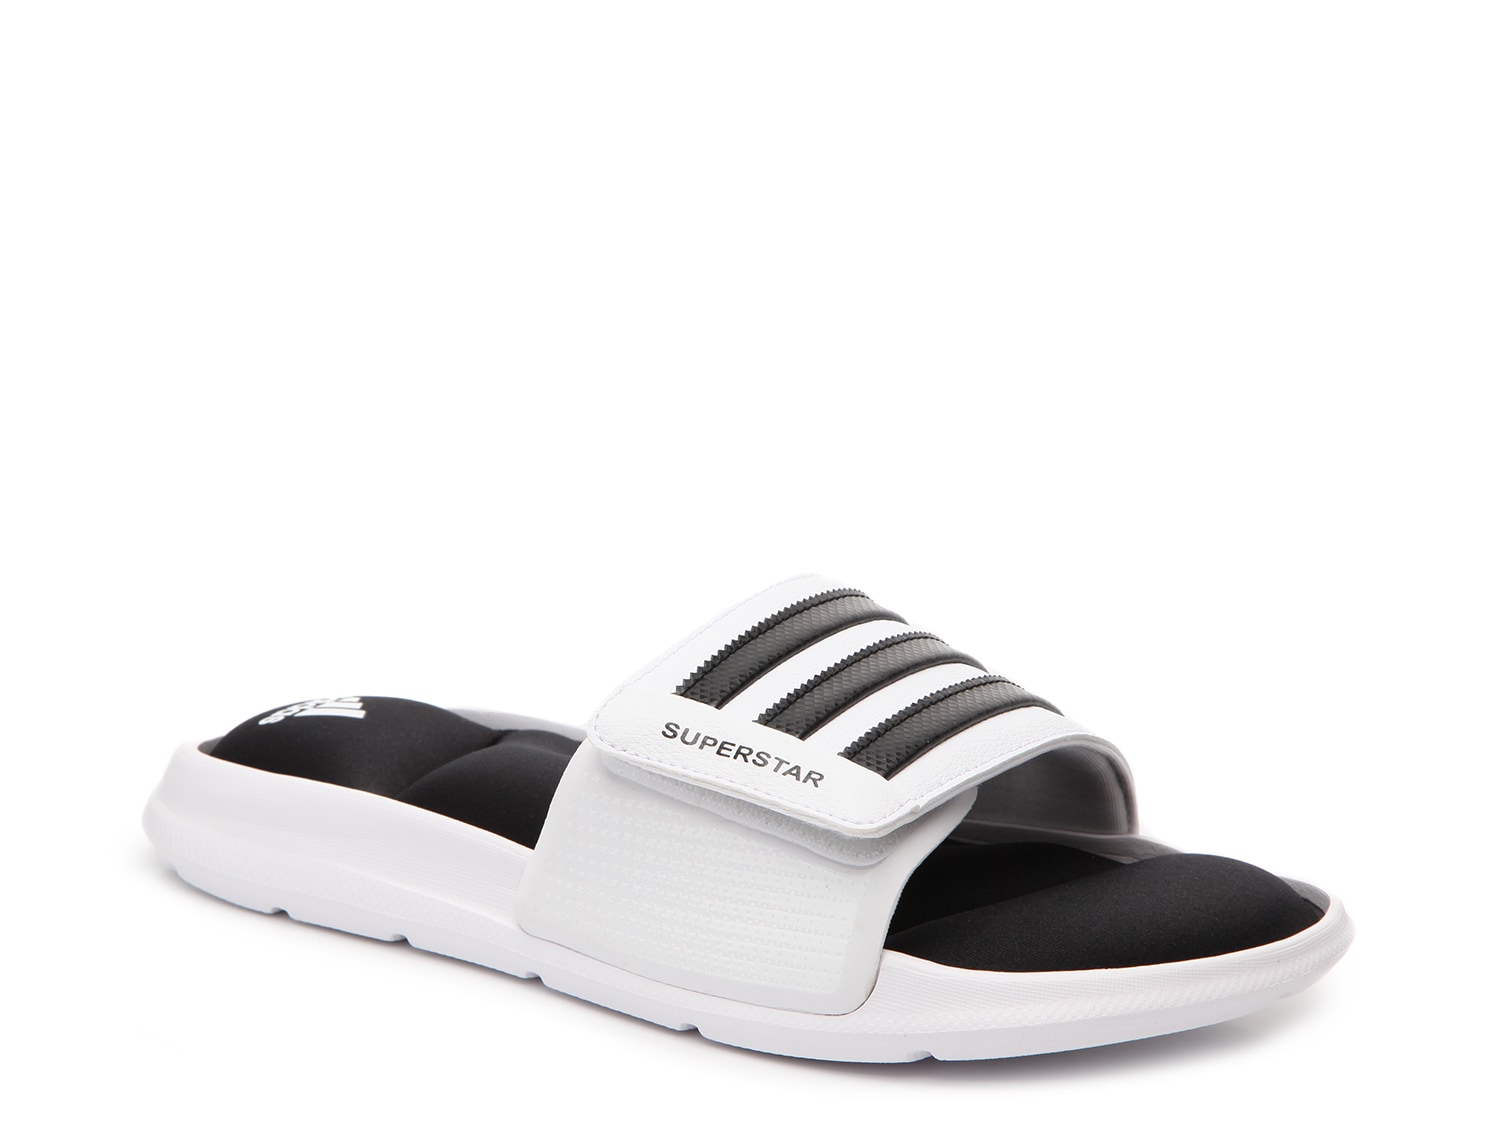 Evenly wall Young lady adidas Superstar 5G Slide Sandal - Men's - Free Shipping | DSW